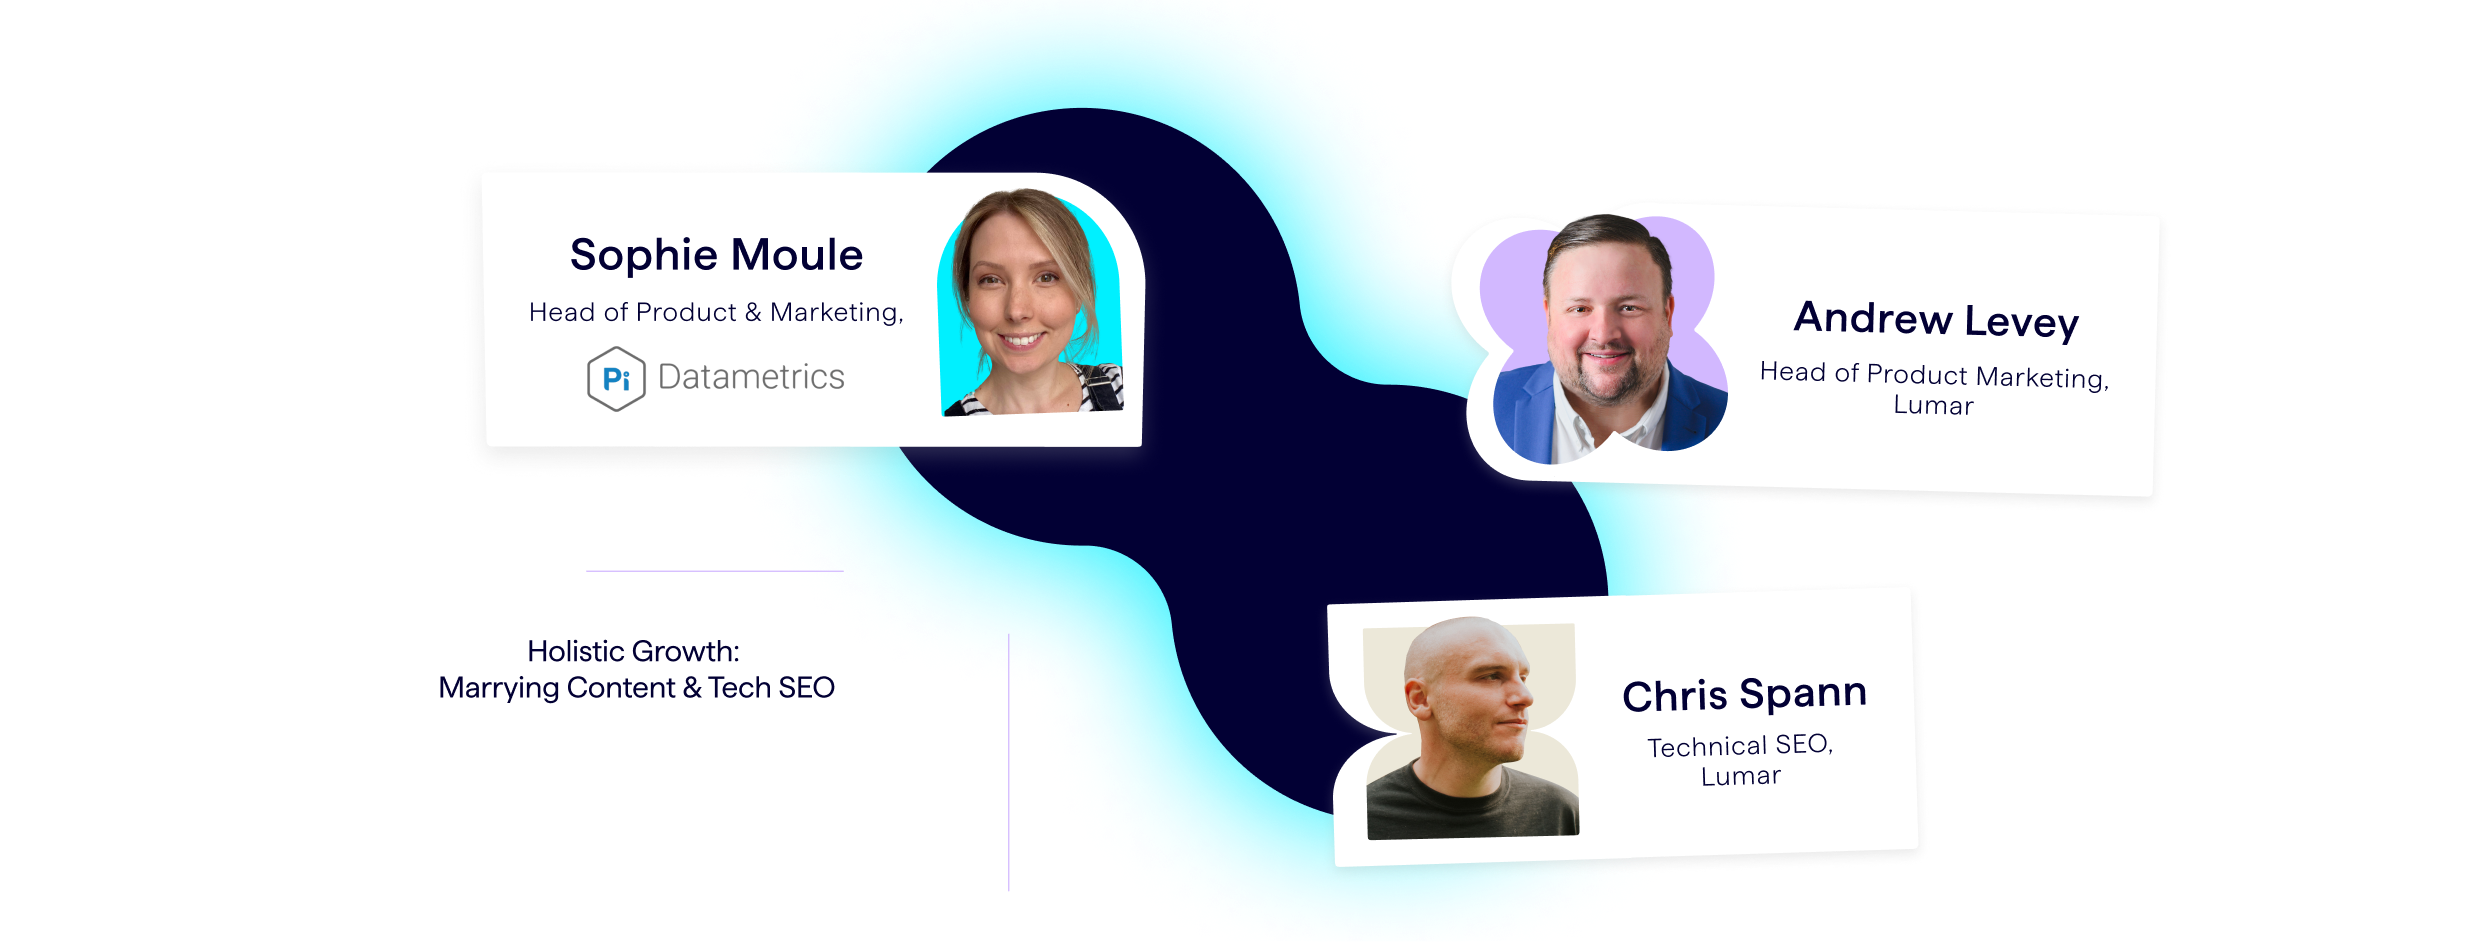 blog banner - webinar featuring both Lumar and Pi Datametrics on how to grow holistically with content and tech SEO